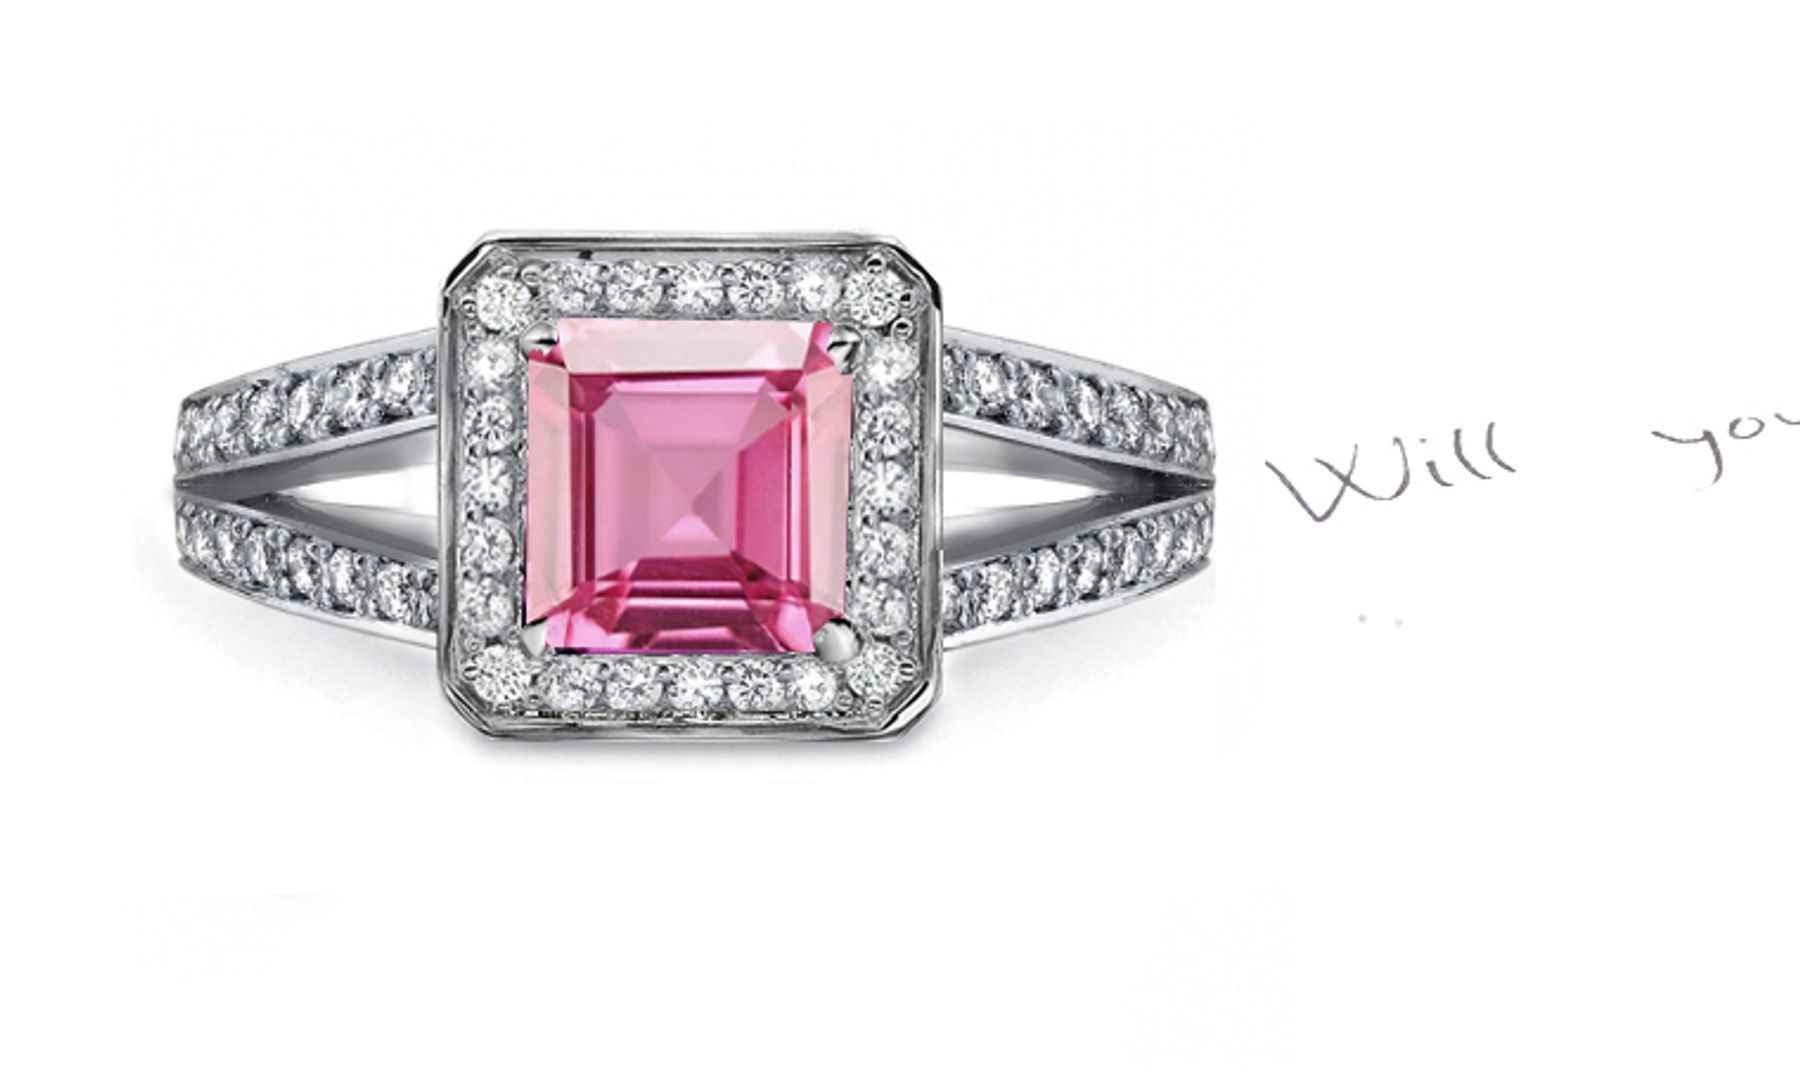 Colorful: A Fine Pink Sapphire & Diamond Ring Click on the Link to Add to Cart Quantity